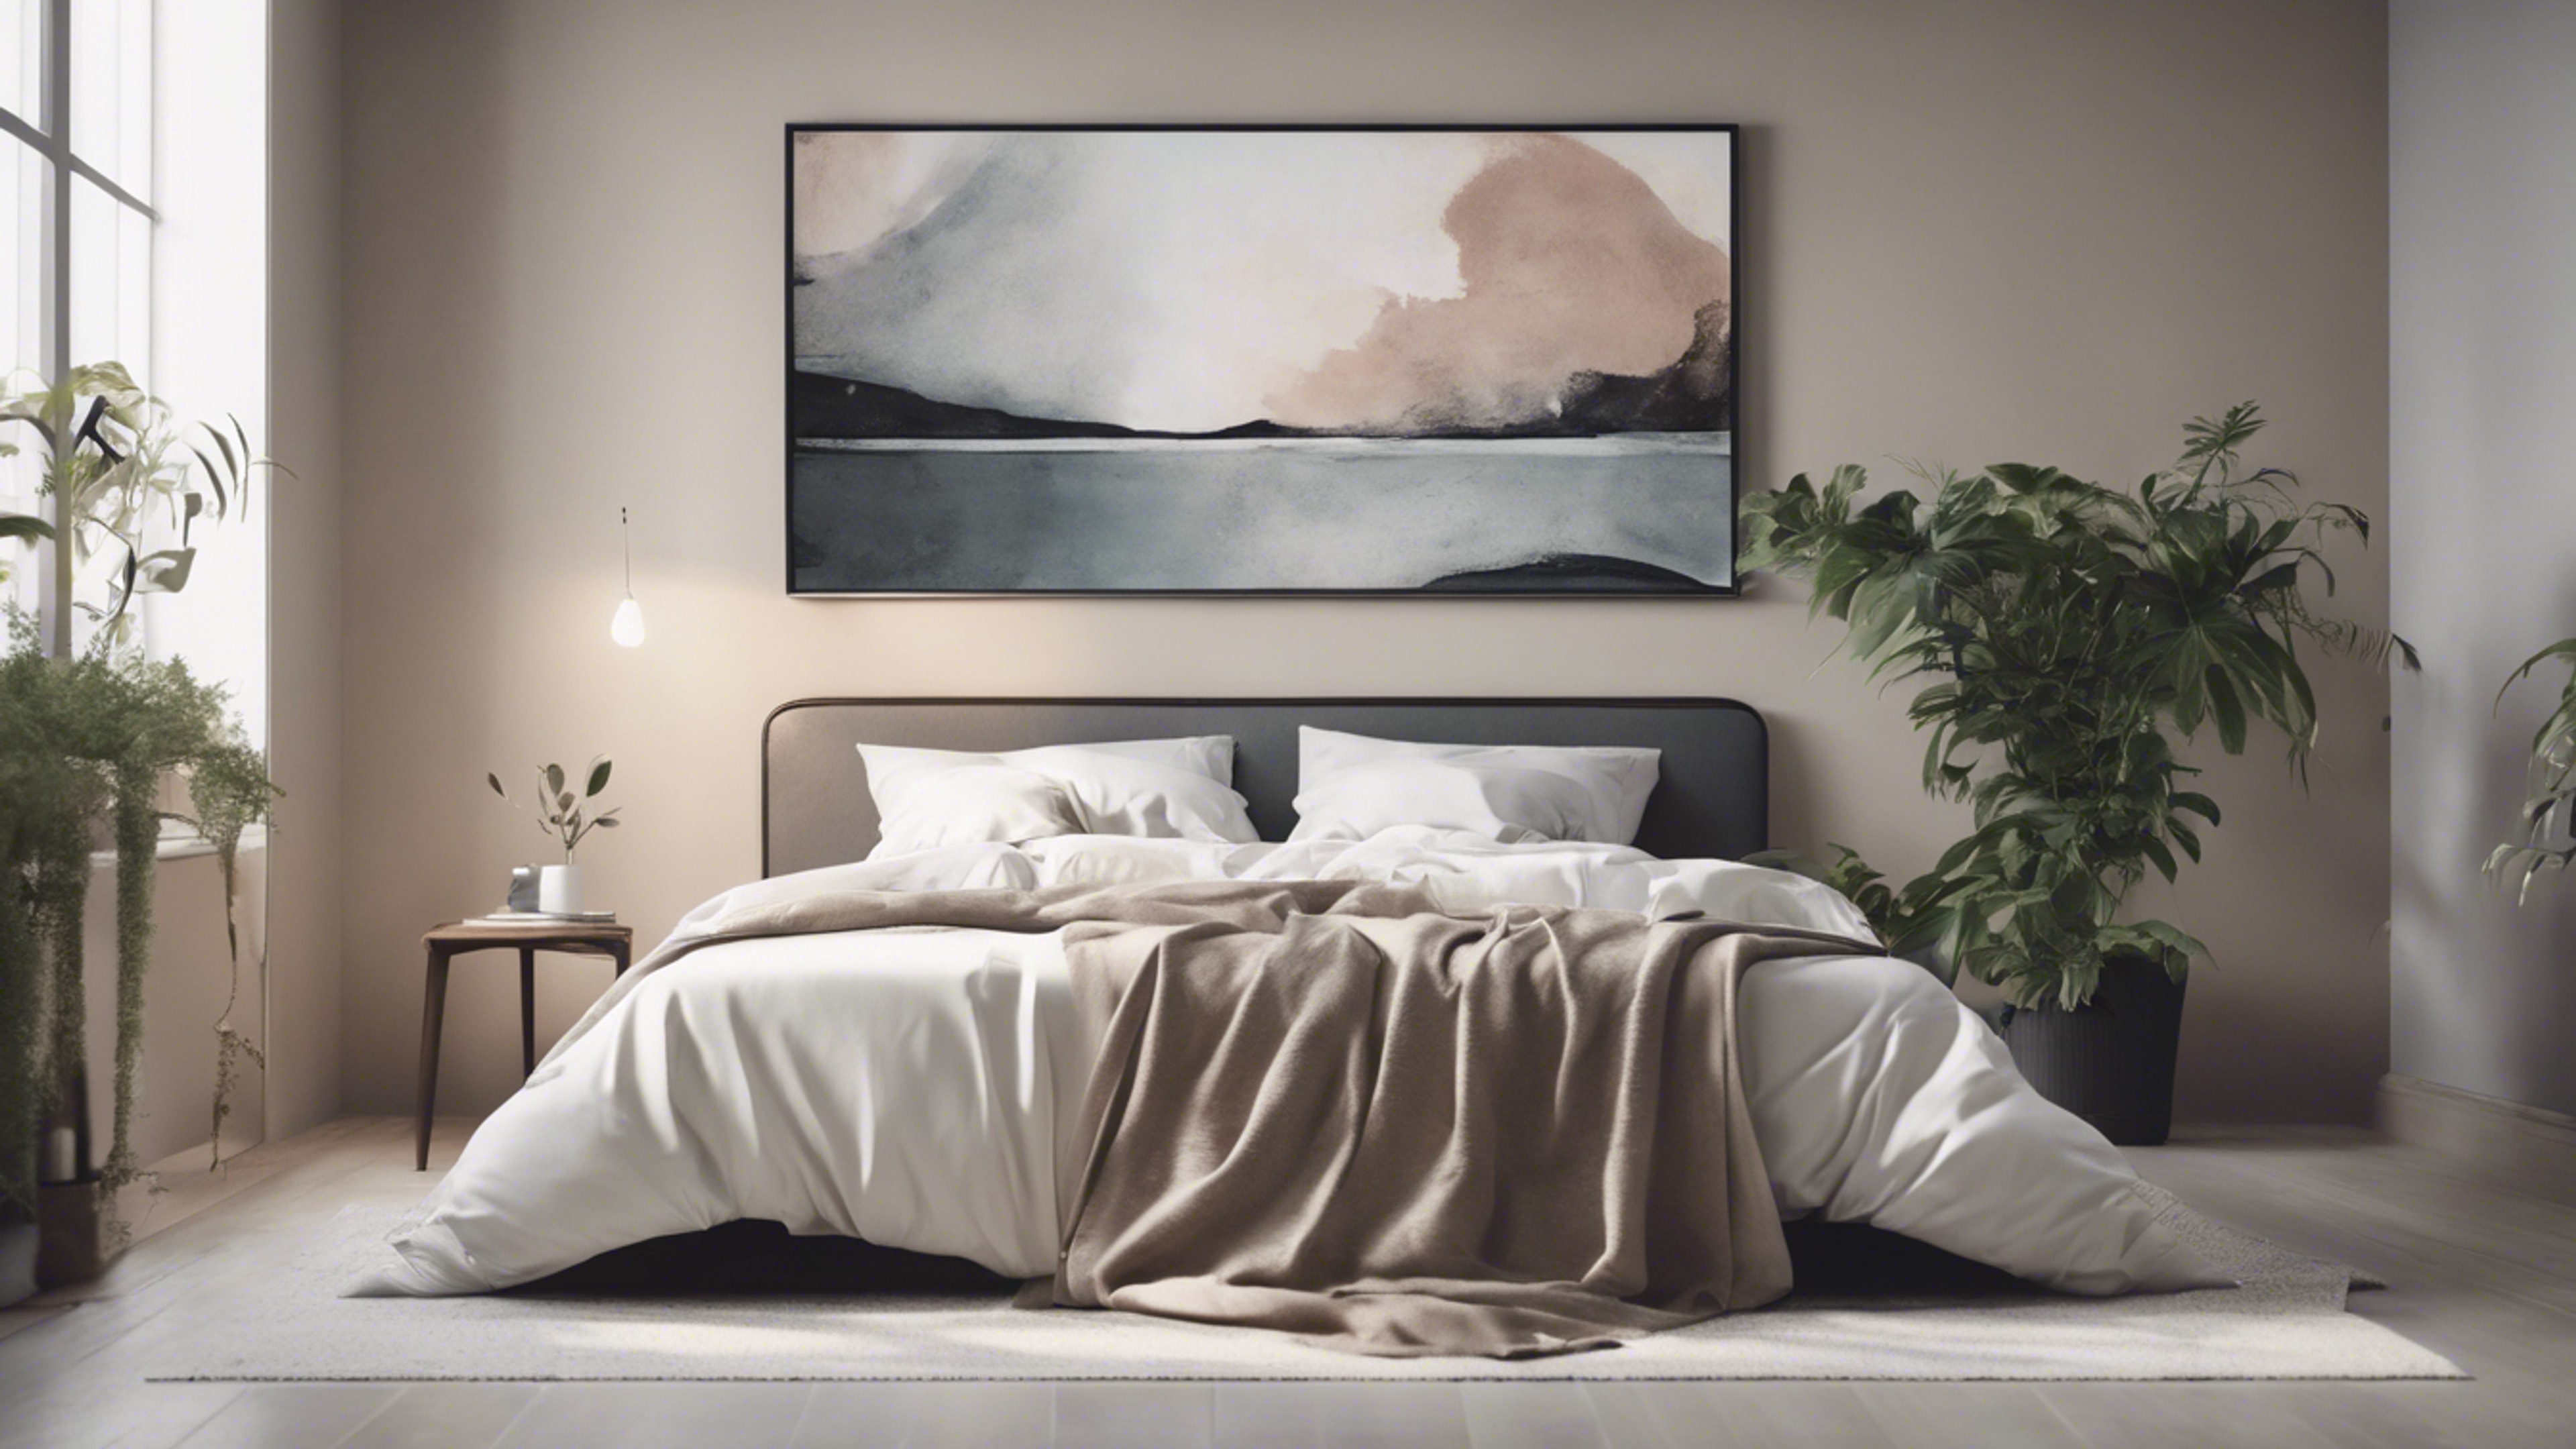 Minimalist bedroom in muted tones with a simple queen-sized bed, a potted plant, and an abstract painting. 벽지[015f6f42387b4ed28c5e]